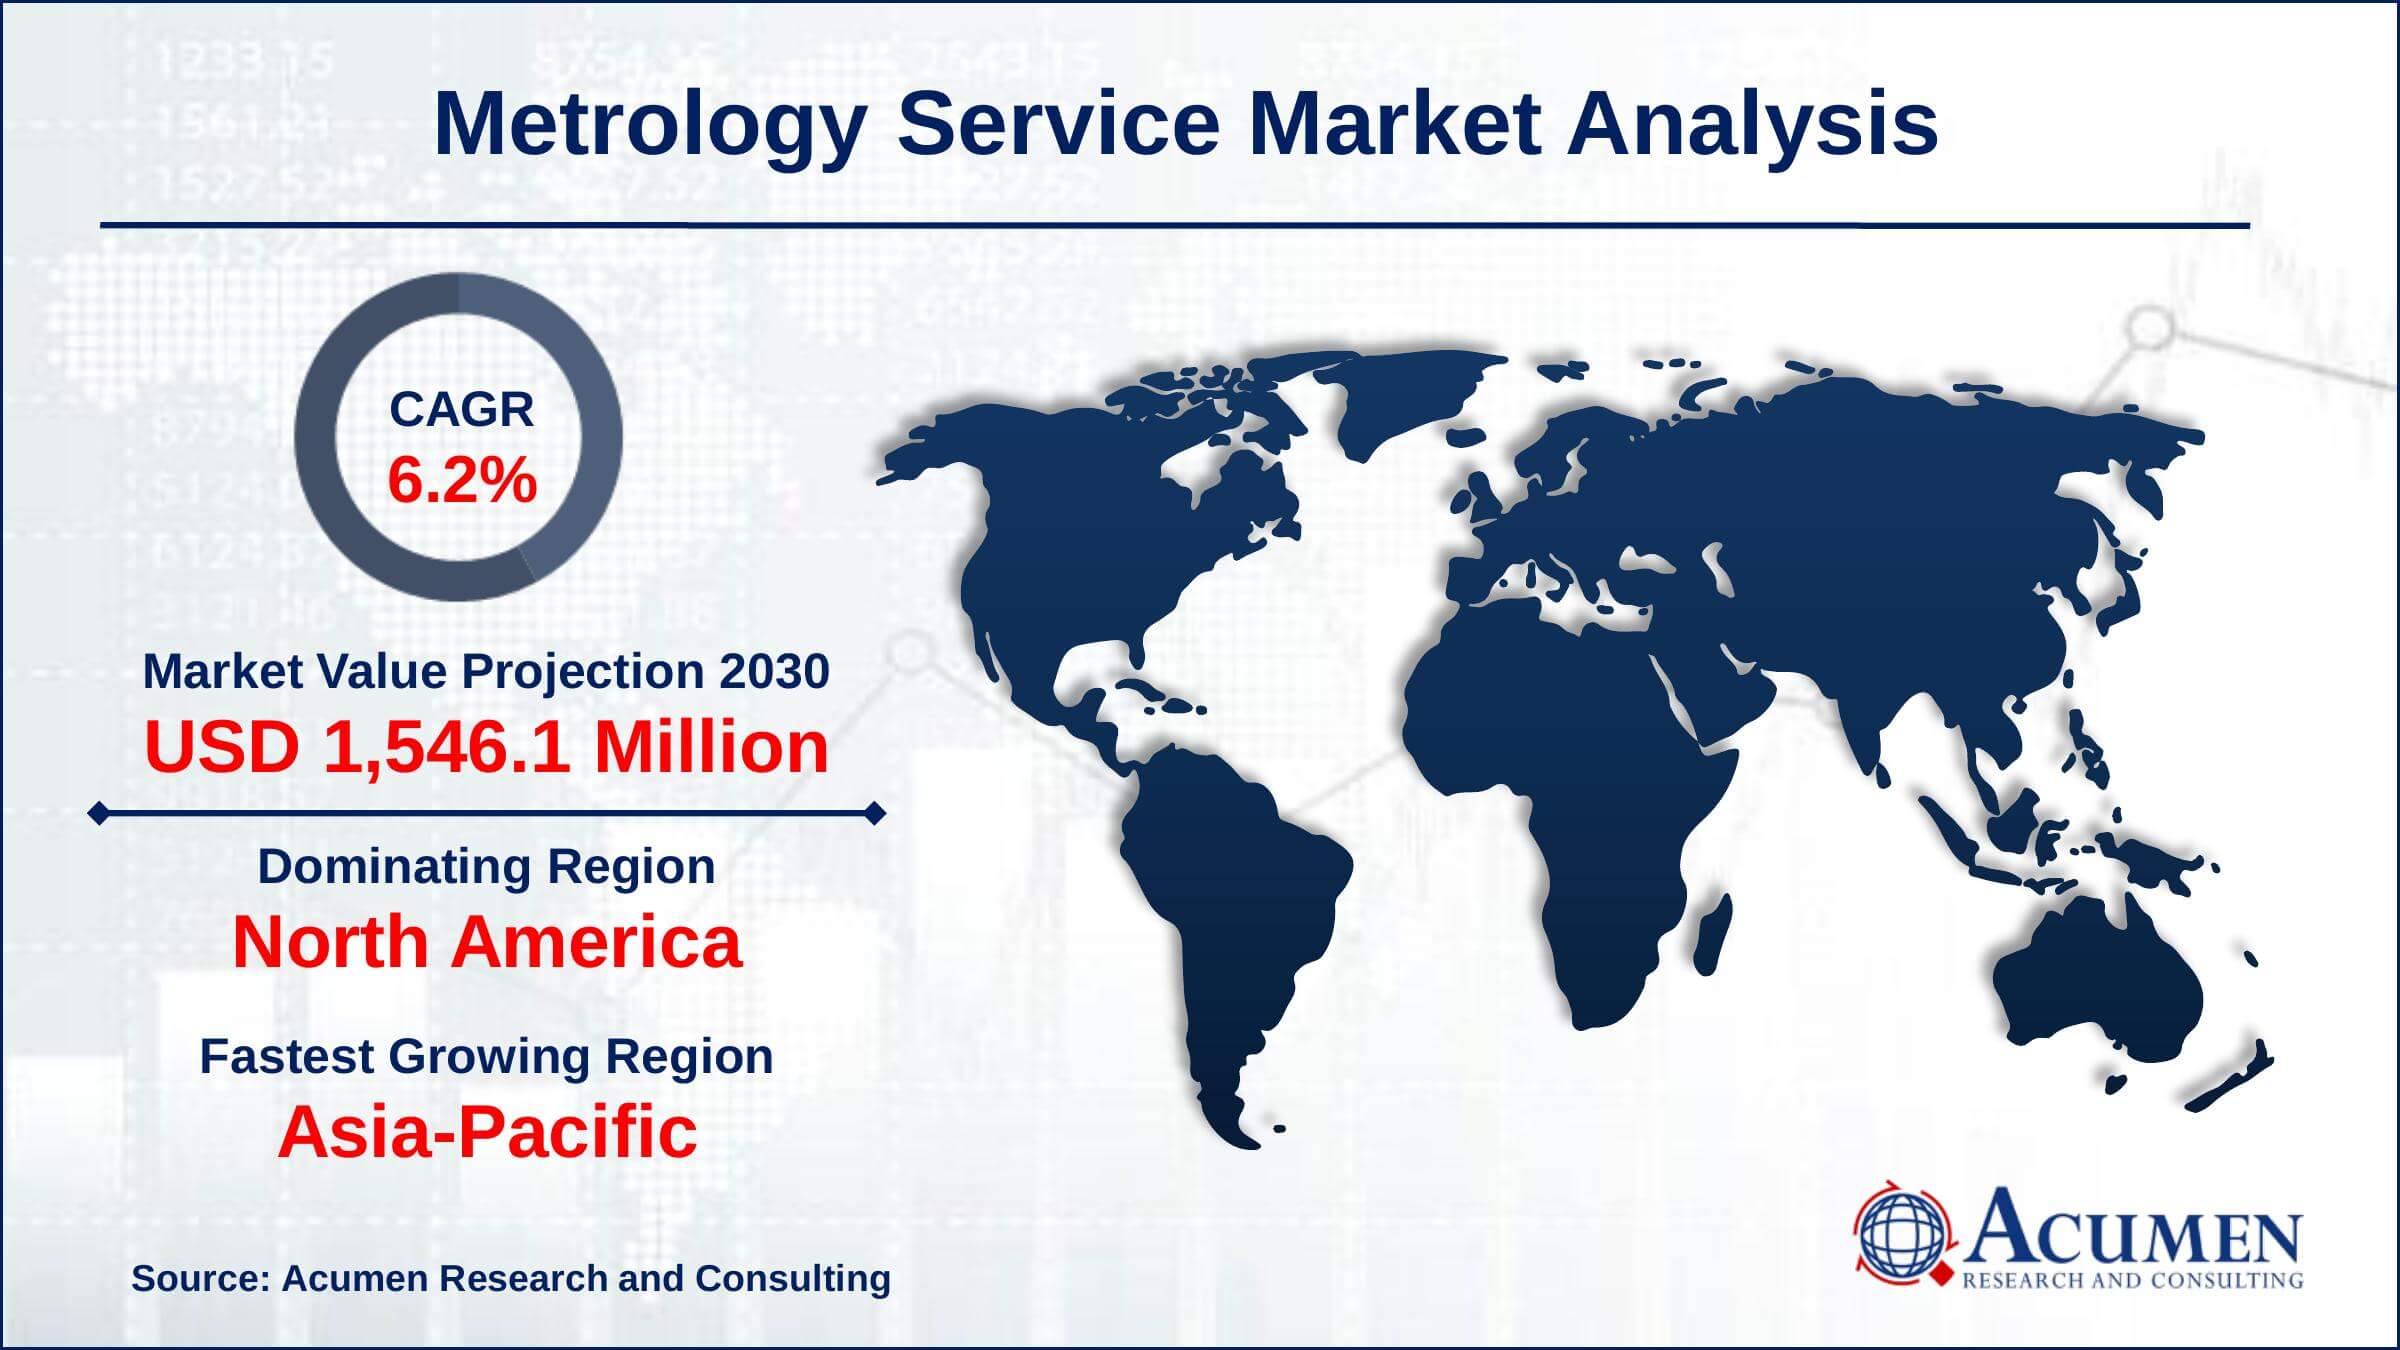 Asia-Pacific metrology service market growth will record substantial CAGR of over 7% from 2022 to 2030